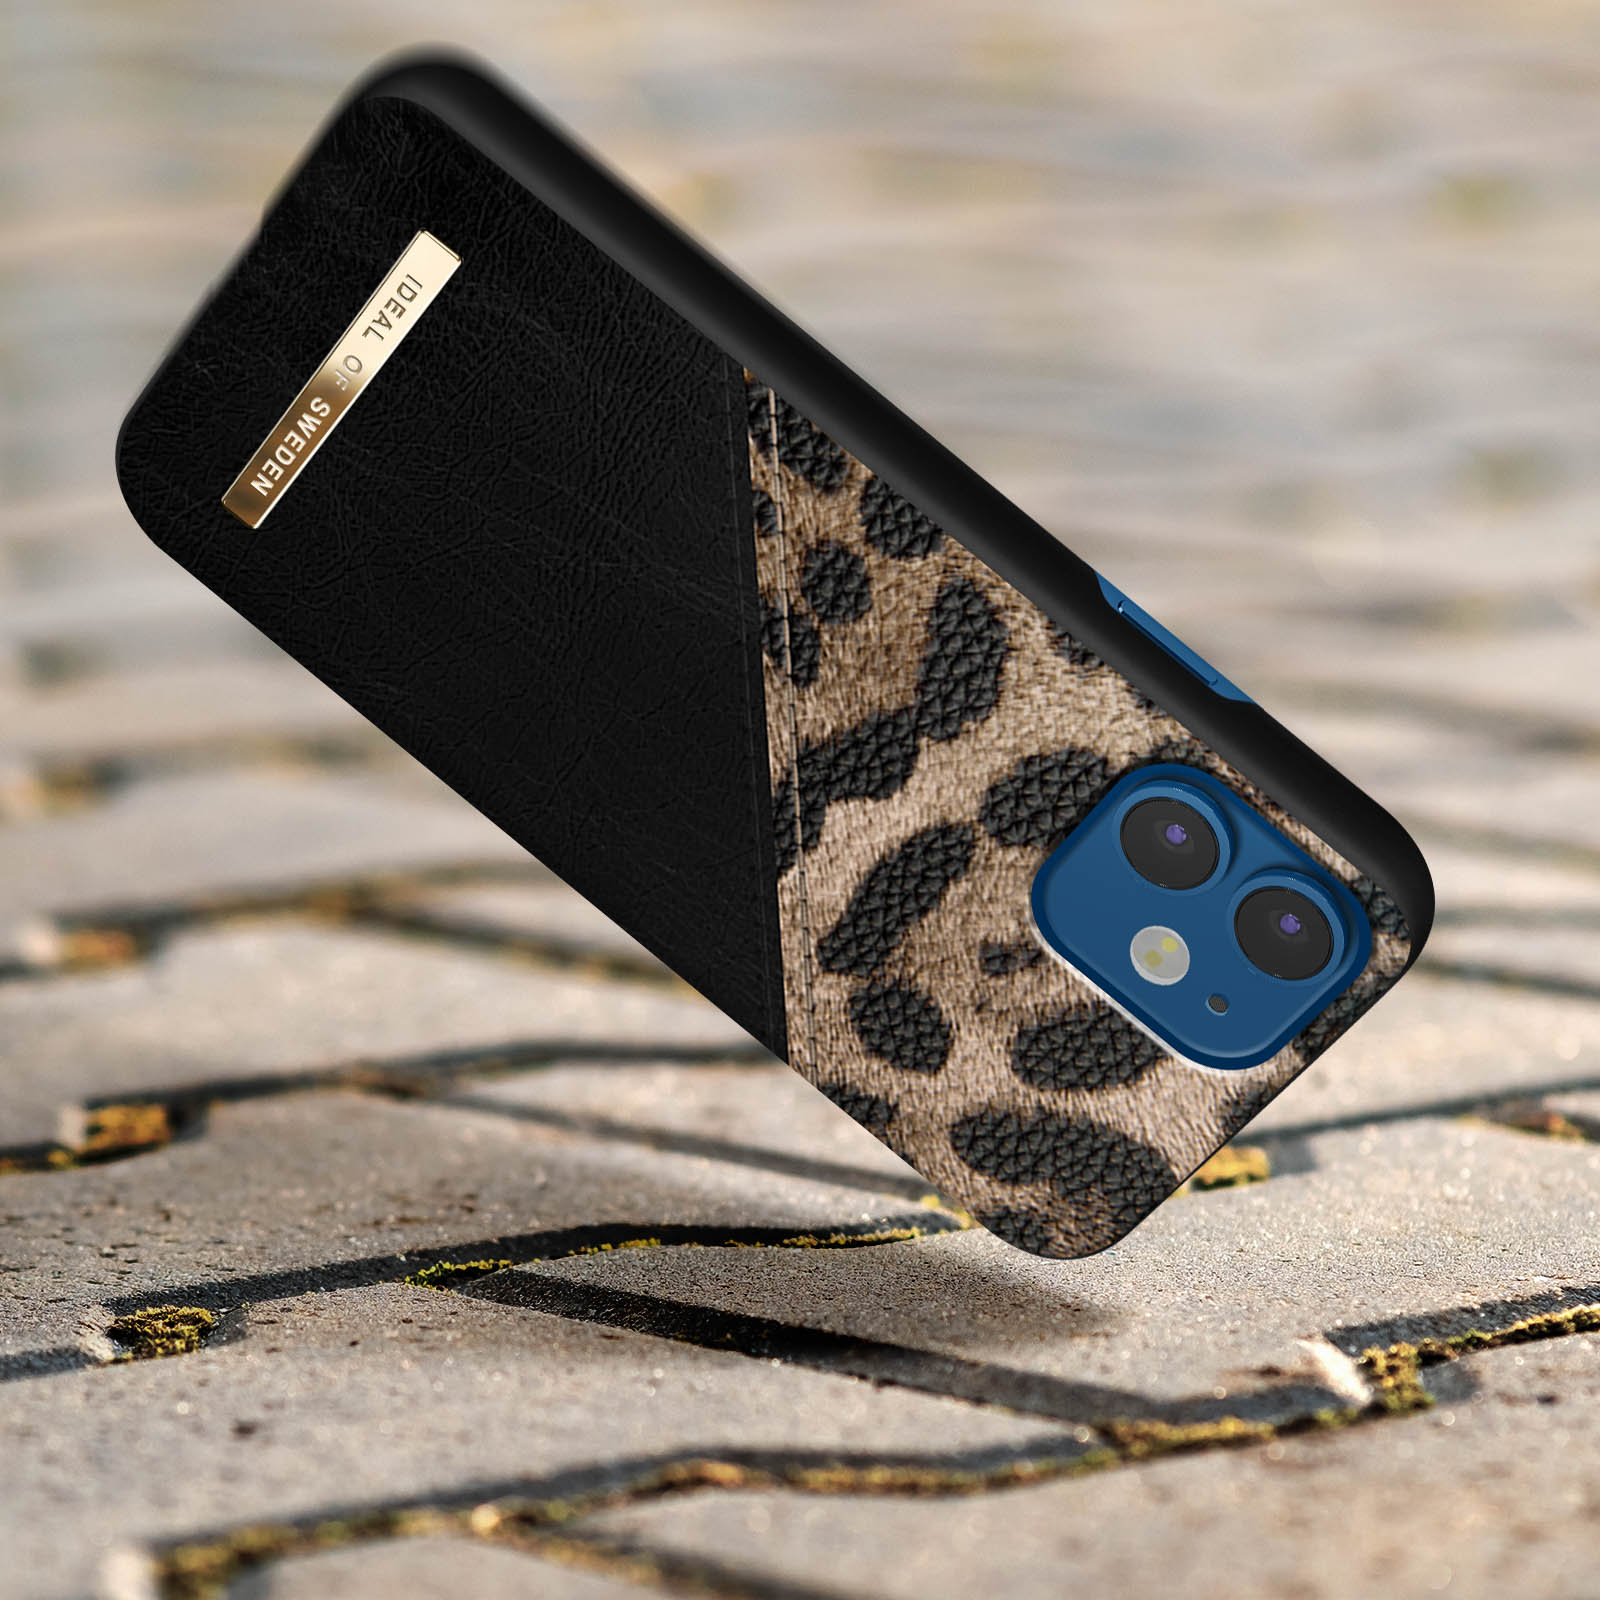 Pro, Midnight iPhone Backcover, OF Leopard Apple, 12/12 IDACAW21-I2061-330, IDEAL SWEDEN